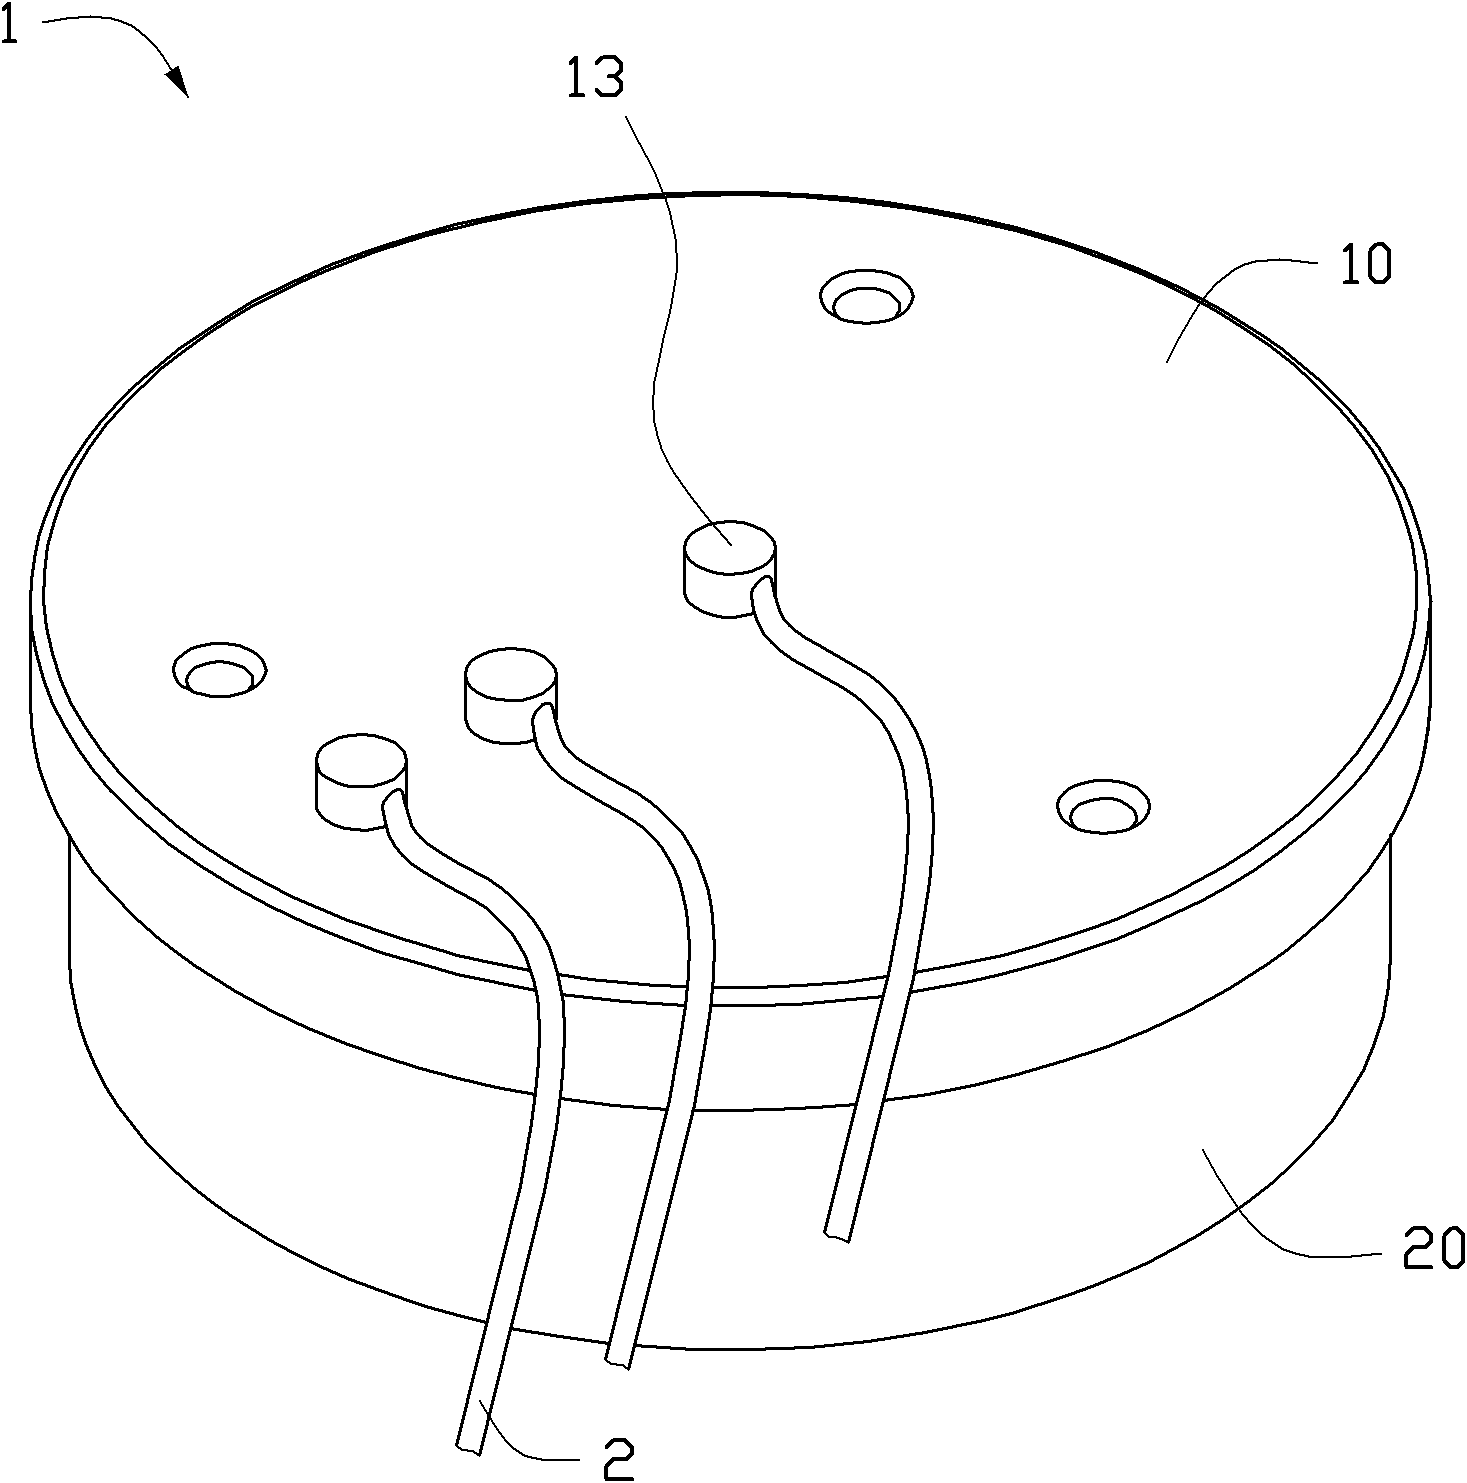 Rotary connecting device